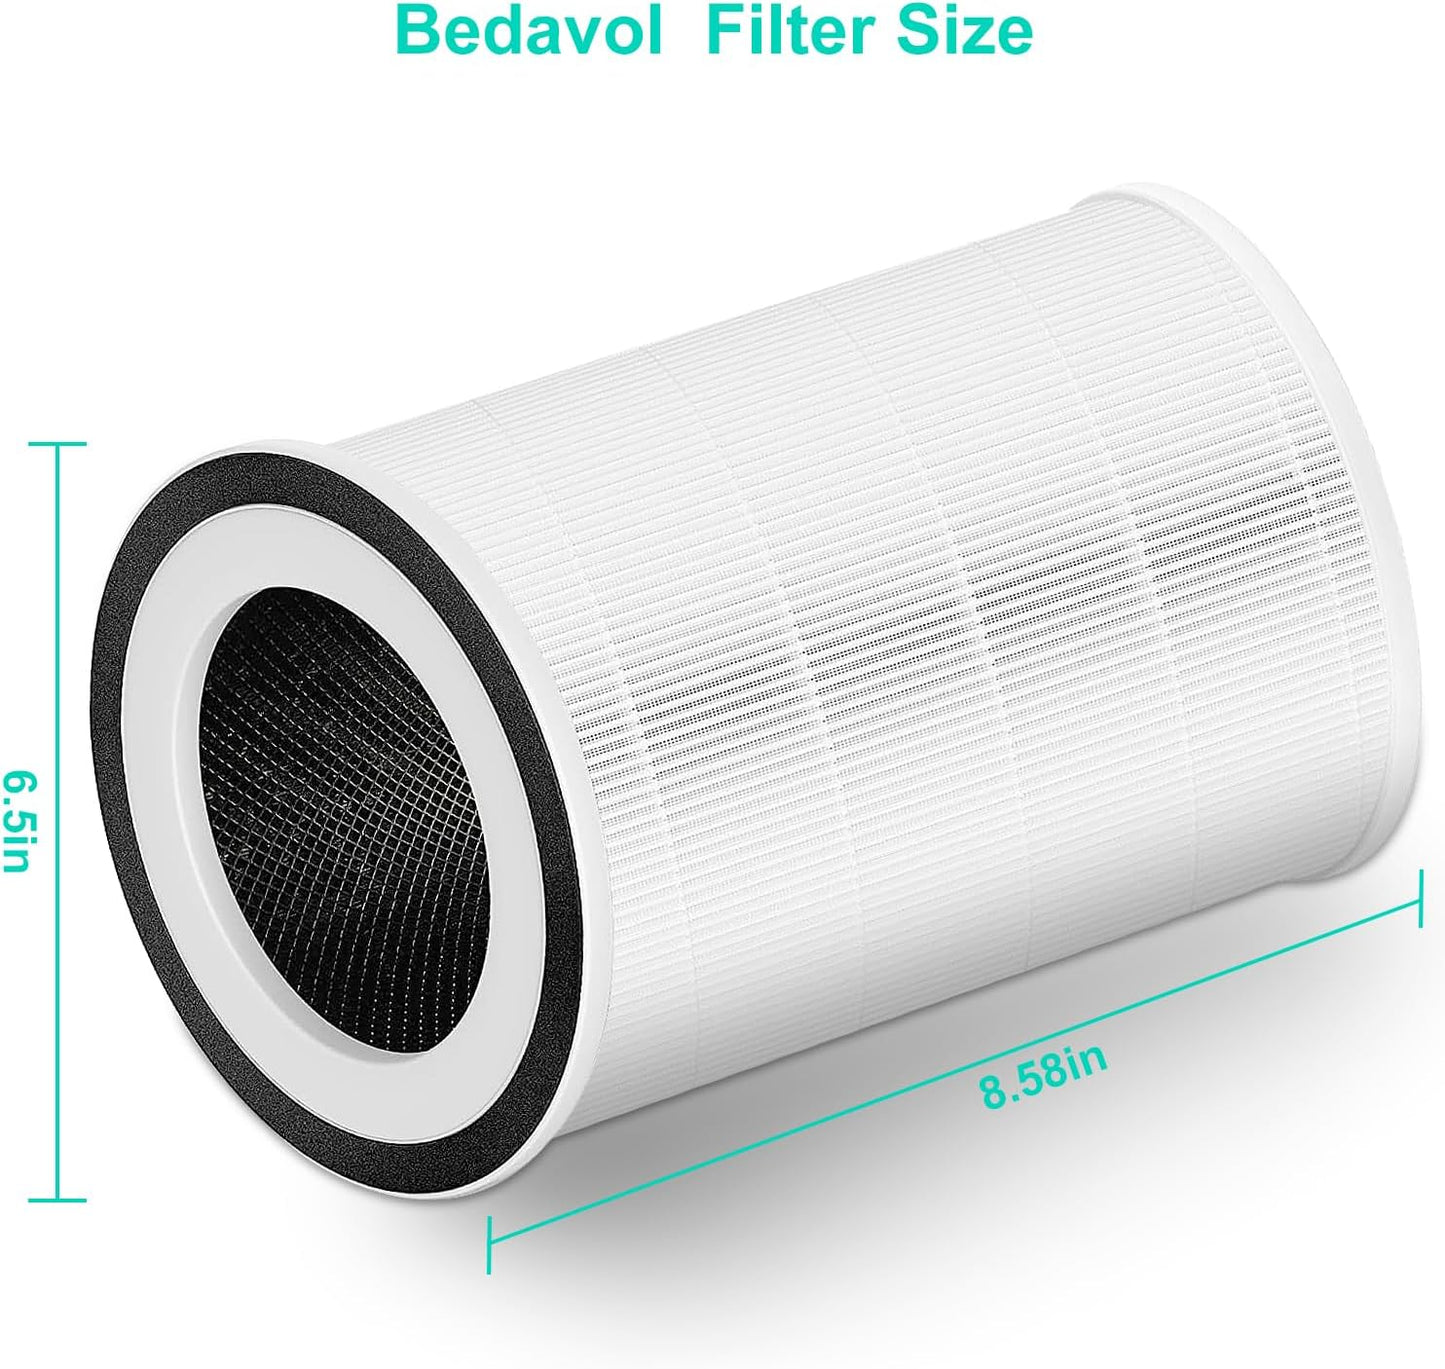 2 Pack for Afloia Filter Replacement